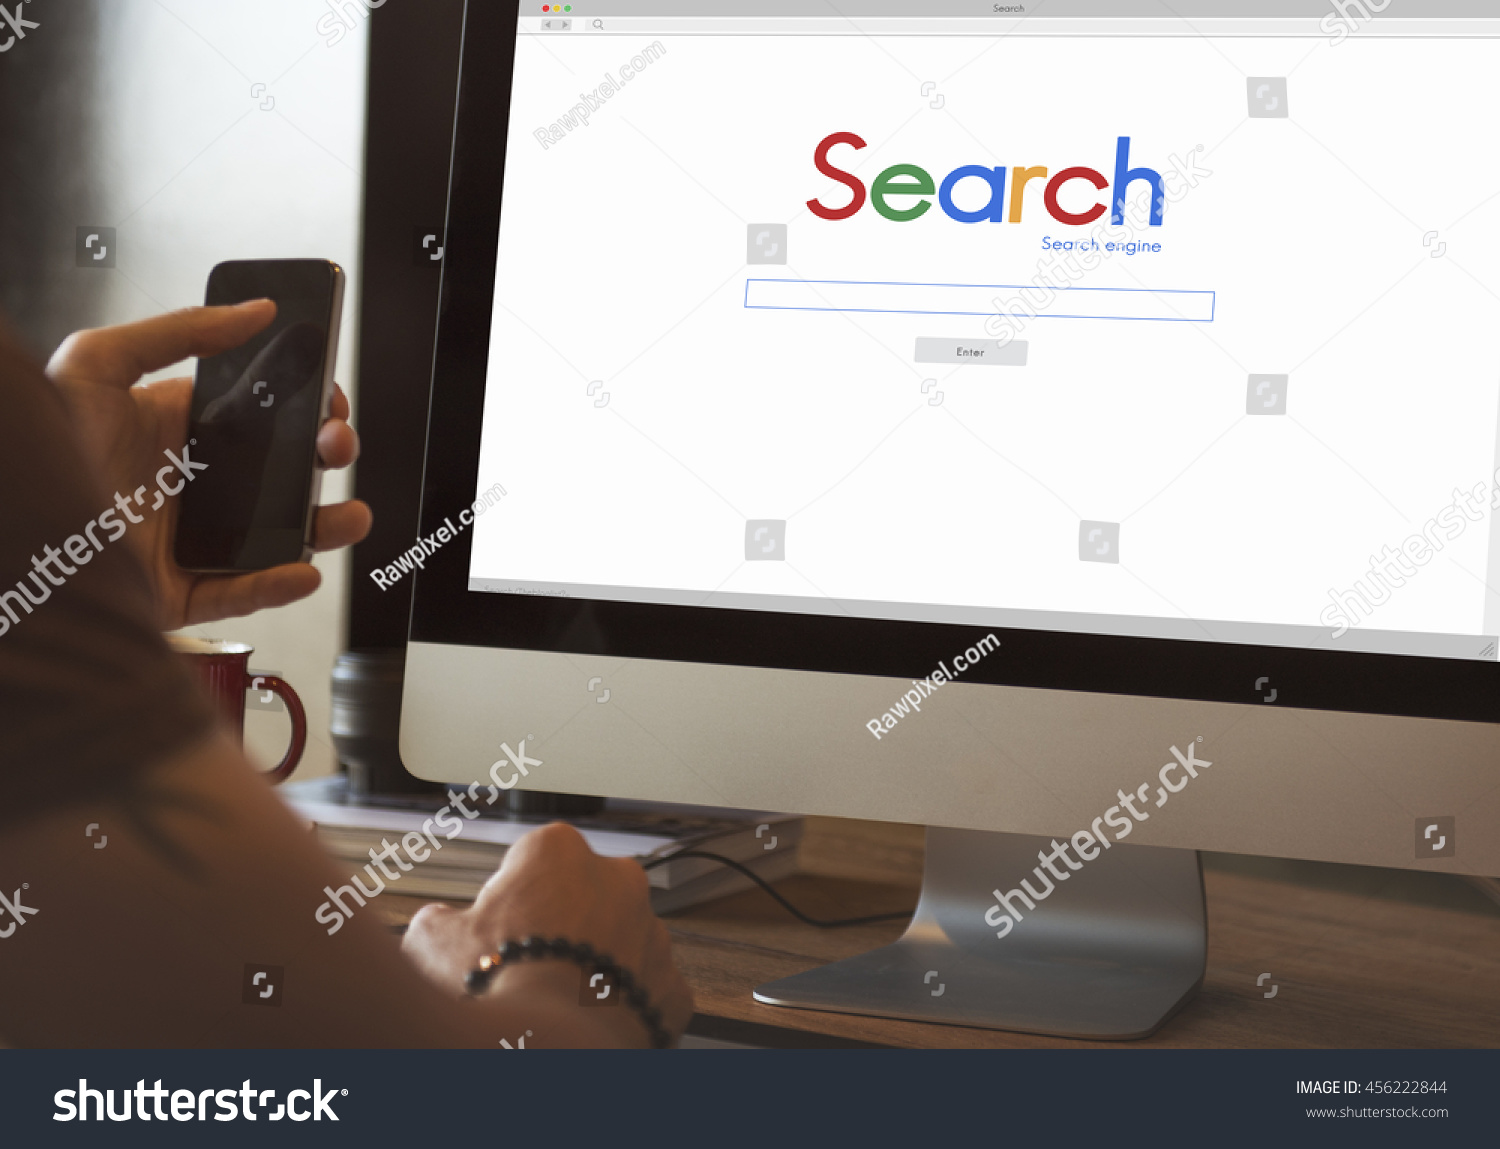 Search Searching Online Network Website Concept #456222844